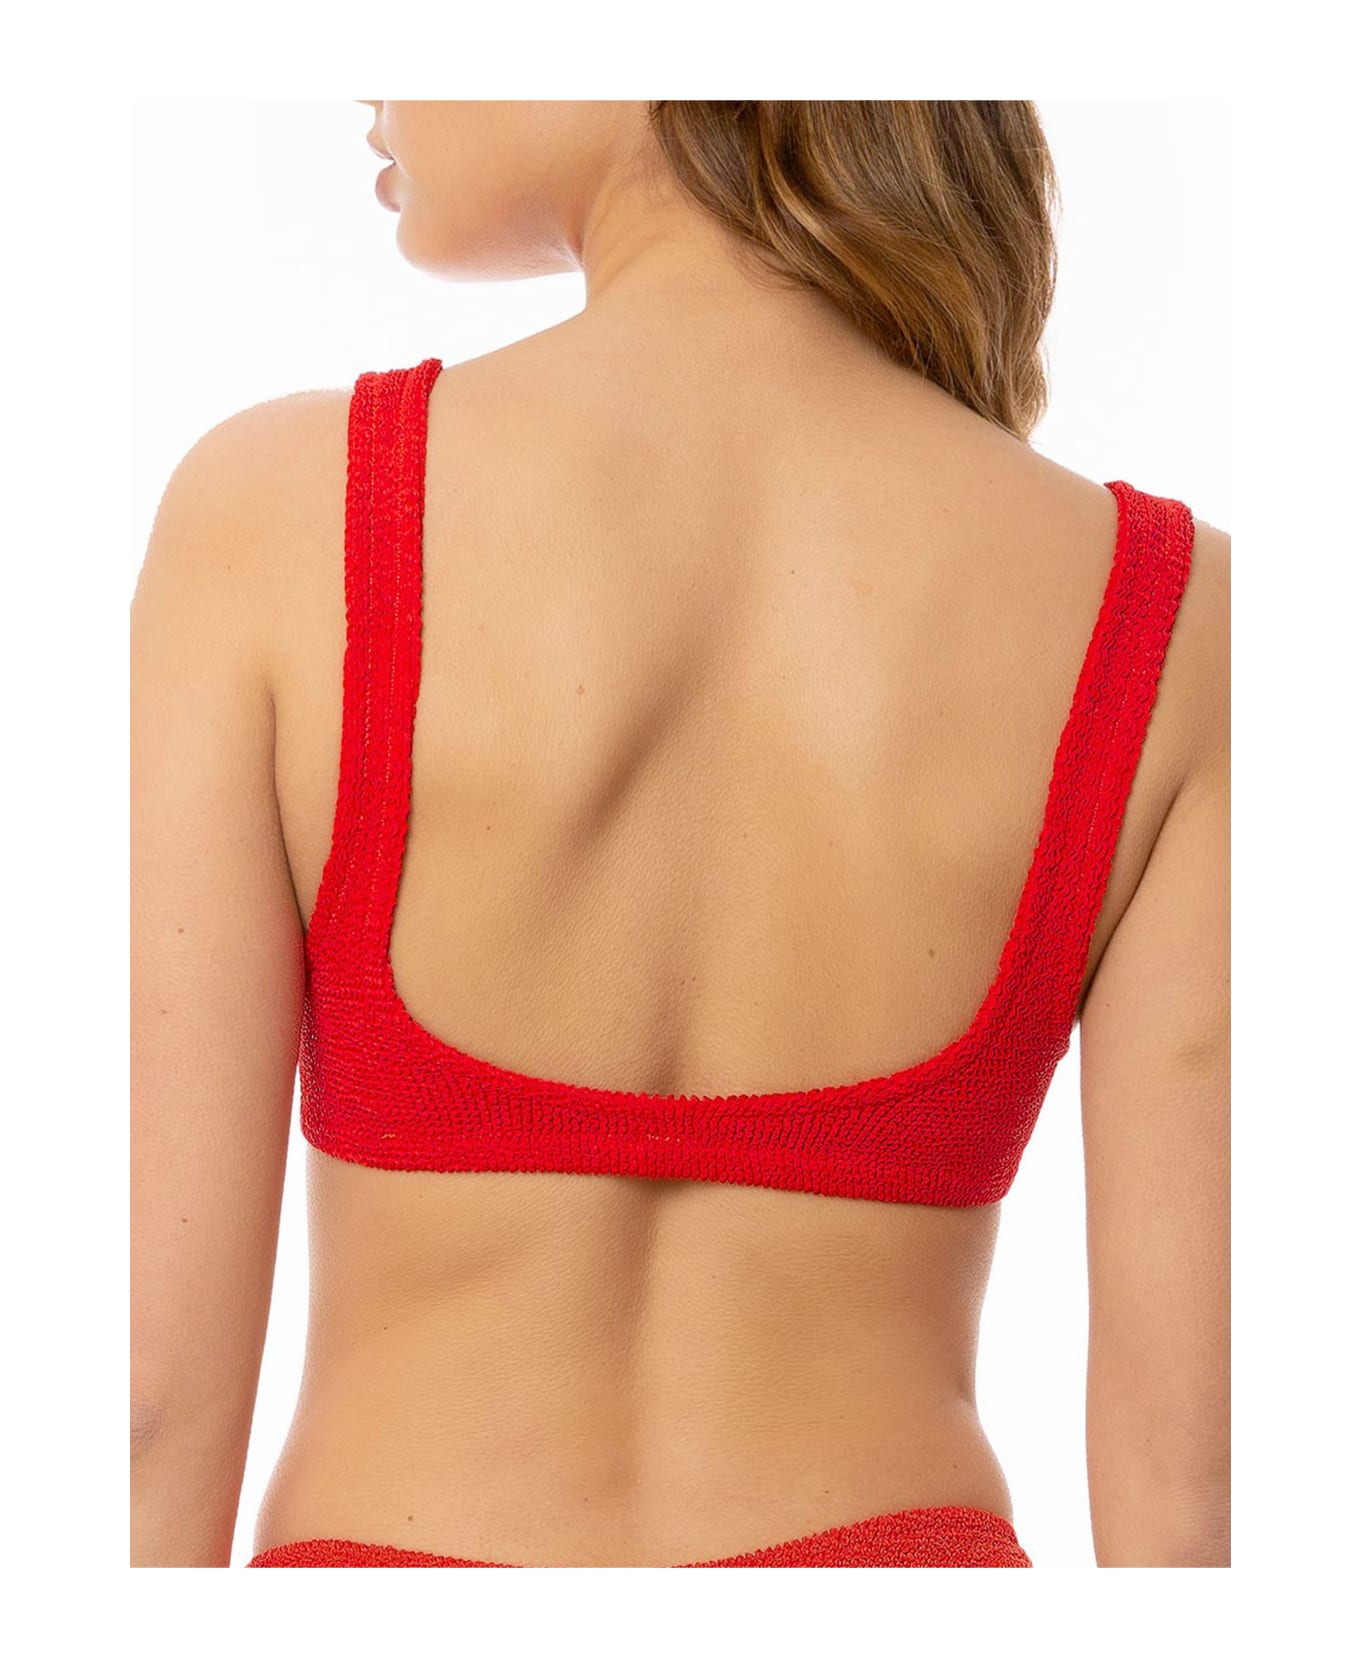 MC2 Saint Barth Woman Red Crinkle Bralette Top Swimsuit - RED